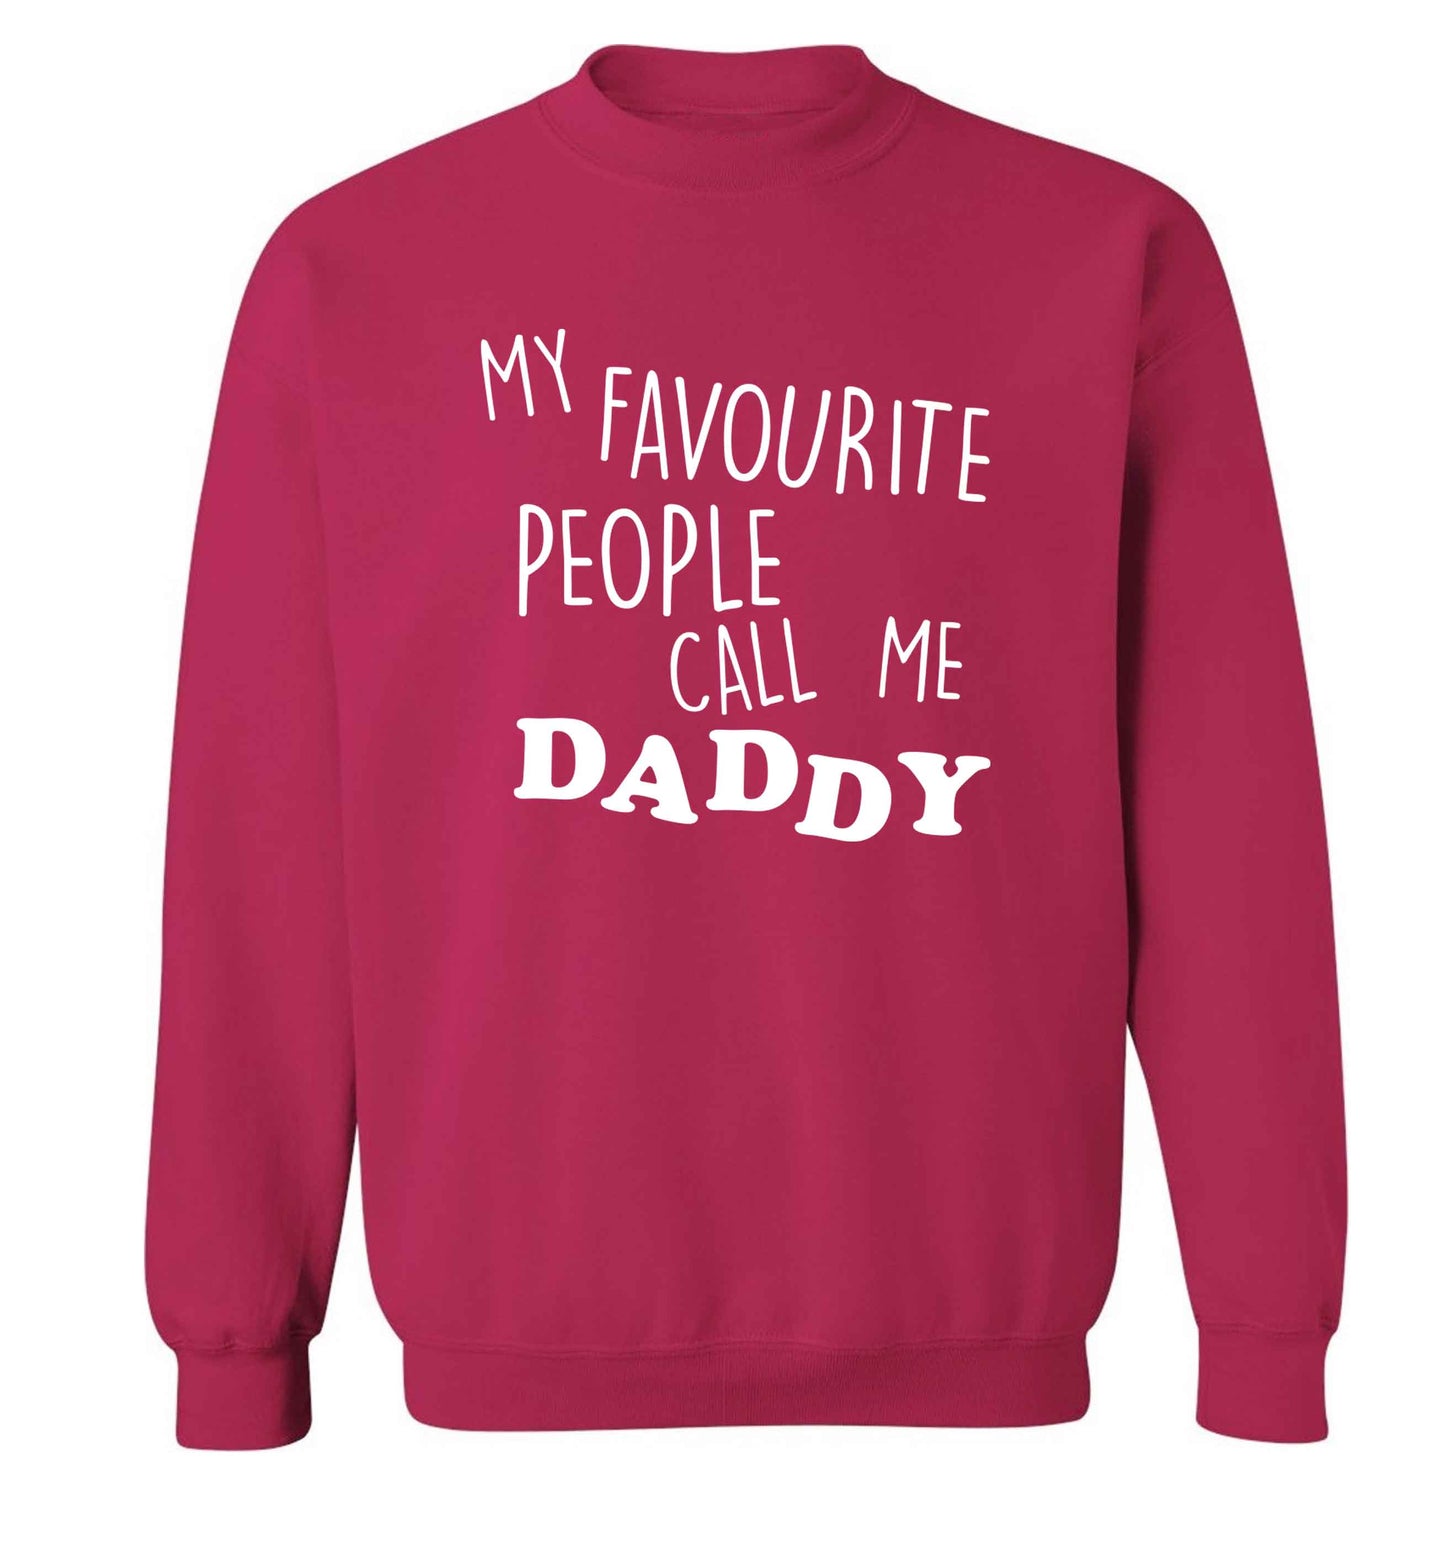 My favourite people call me daddy adult's unisex pink sweater 2XL